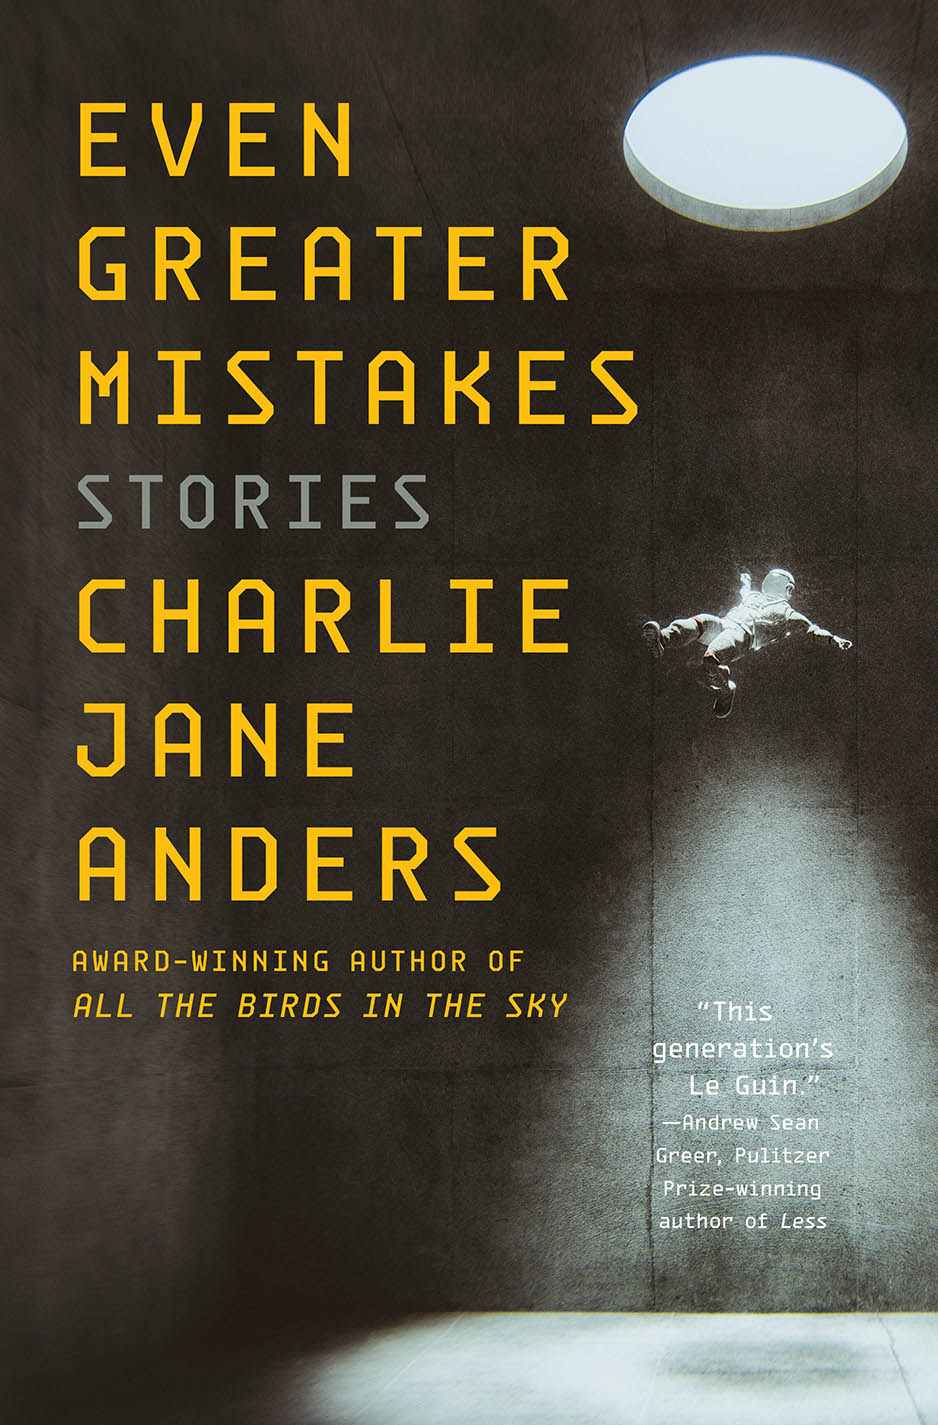 Even Greater Mistakes by Charlie Jane Anders book cover